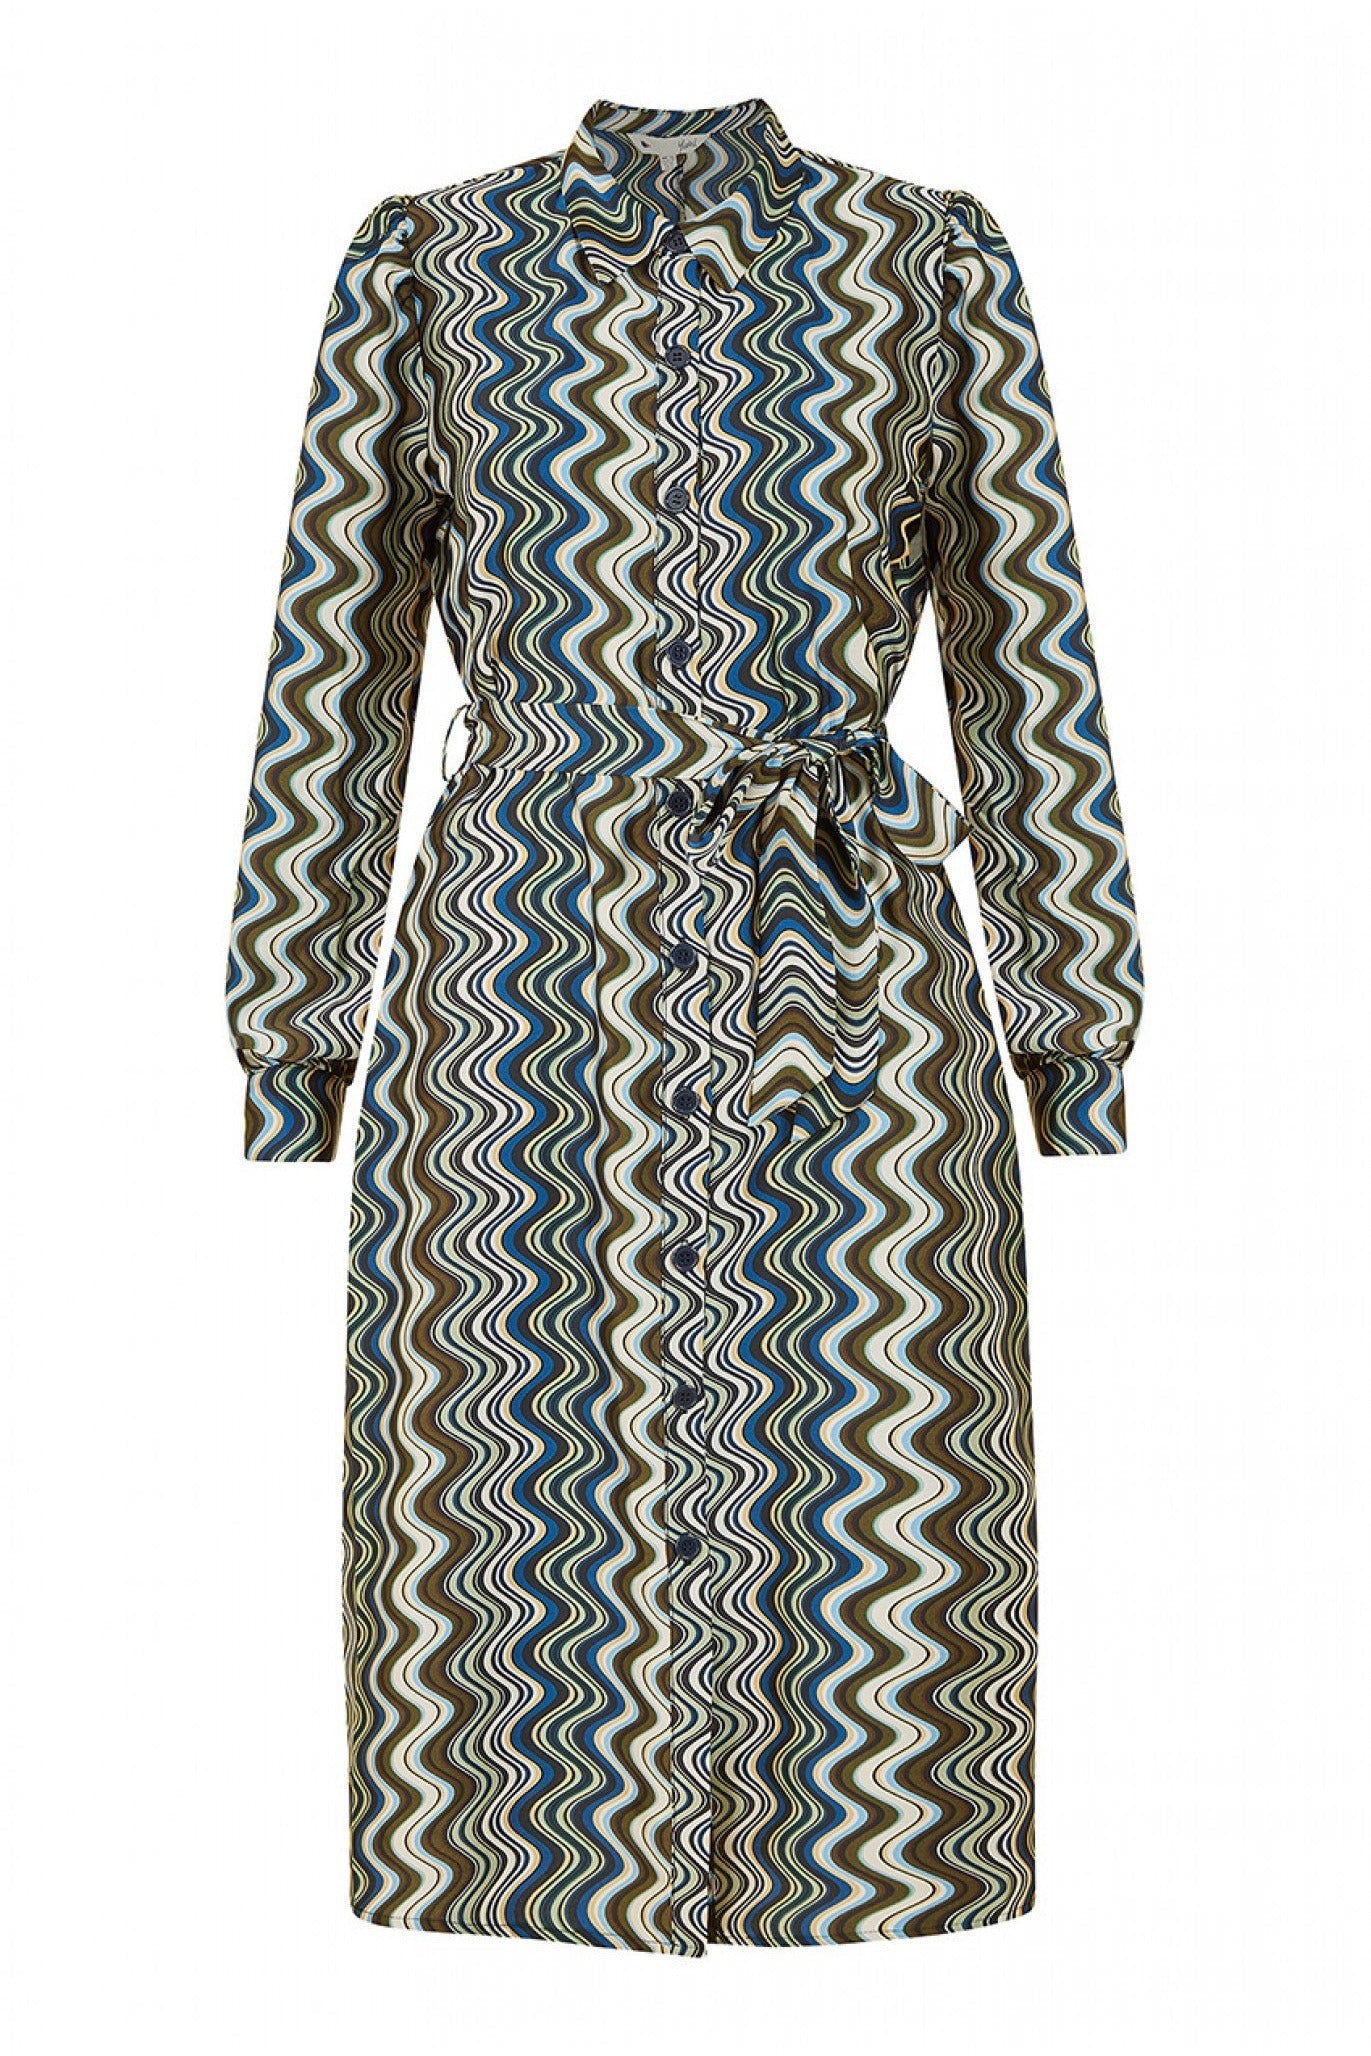 Multicolour Abstract Stripes Shirt Dress YM3785207